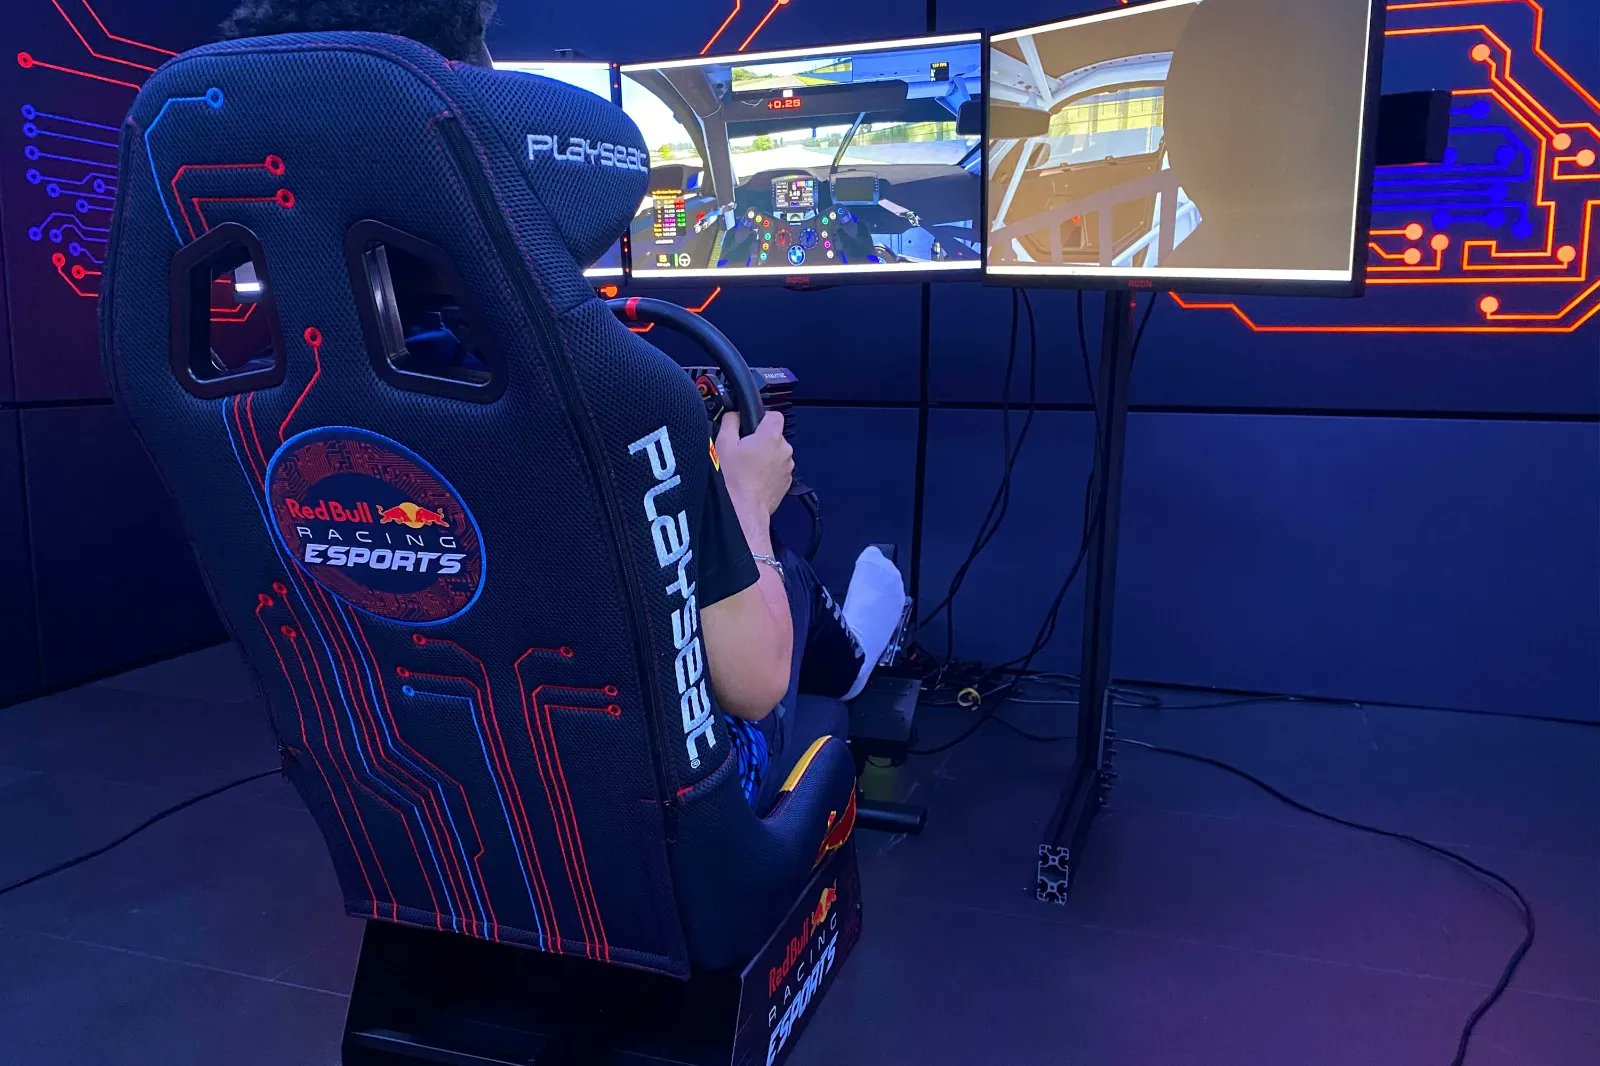 dragt skammel tidligste Twitter 上的 Playseat®："With Red Bull Racing Esports we've launched the new  Playseat®️ Evolution PRO Red Bull Racing Esports. Will you be the next Red  Bull Racing Esports driver? Playseat®️ Evolution PRO Red